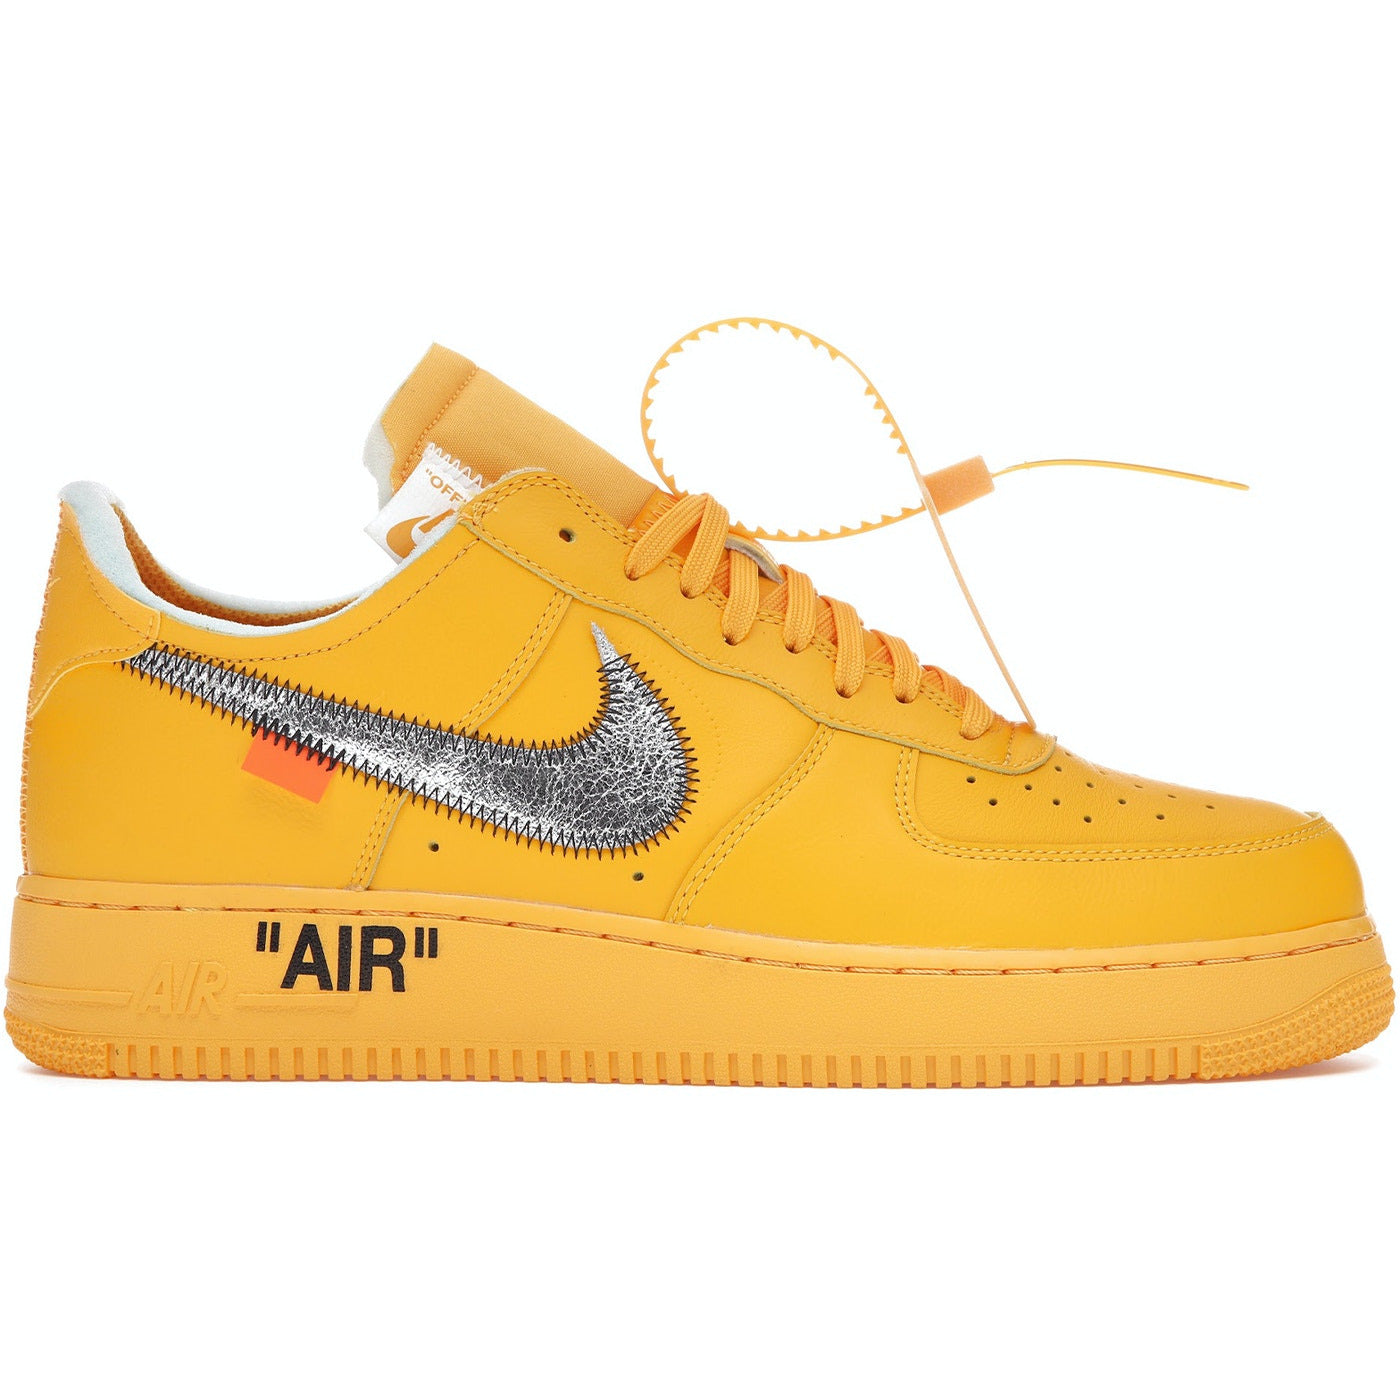 Nike Air Force 1 Low Off-White University Gold THE GARDEN